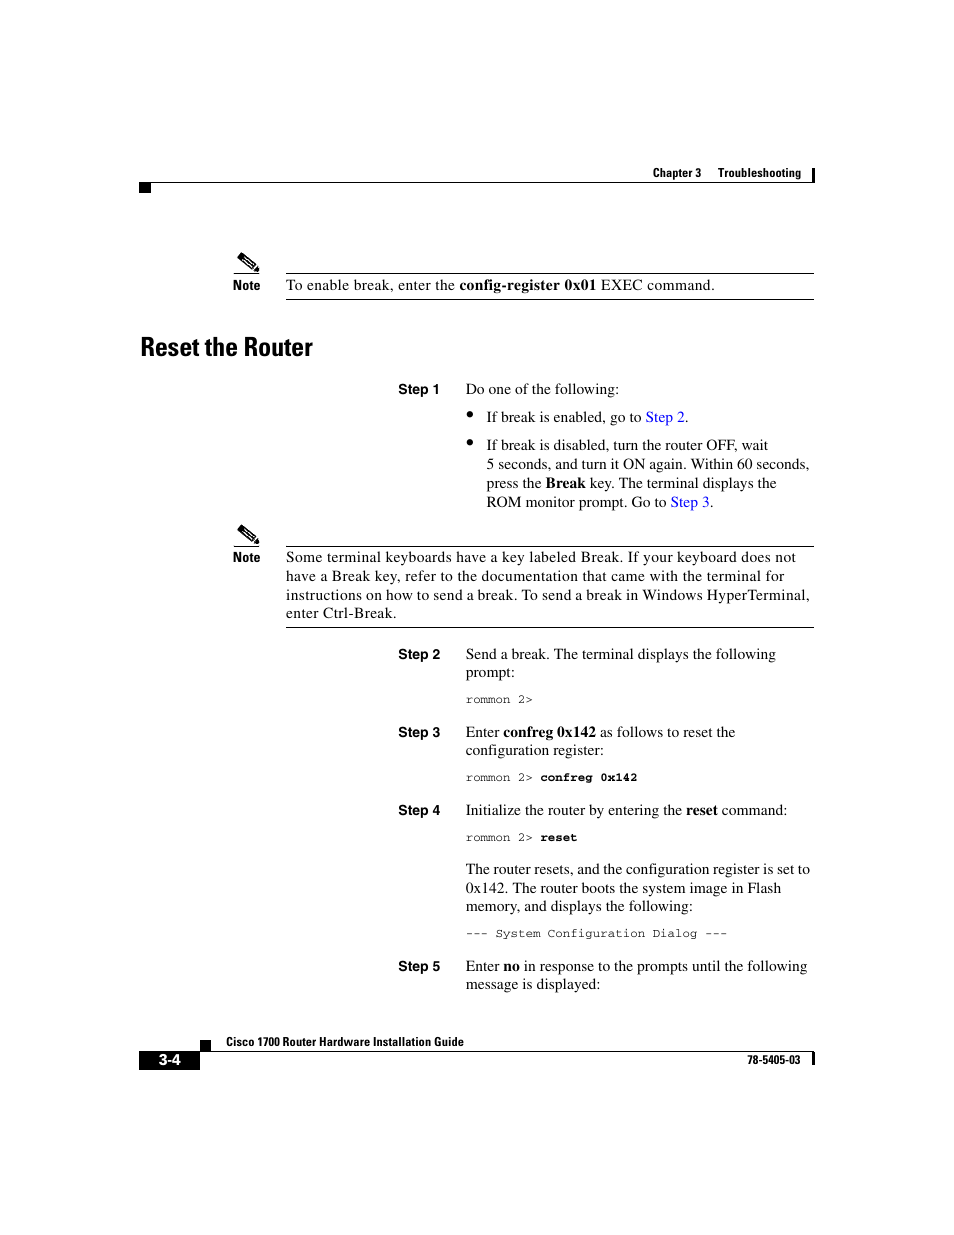 Reset the router | Cisco 1700 User Manual | Page 52 / 88